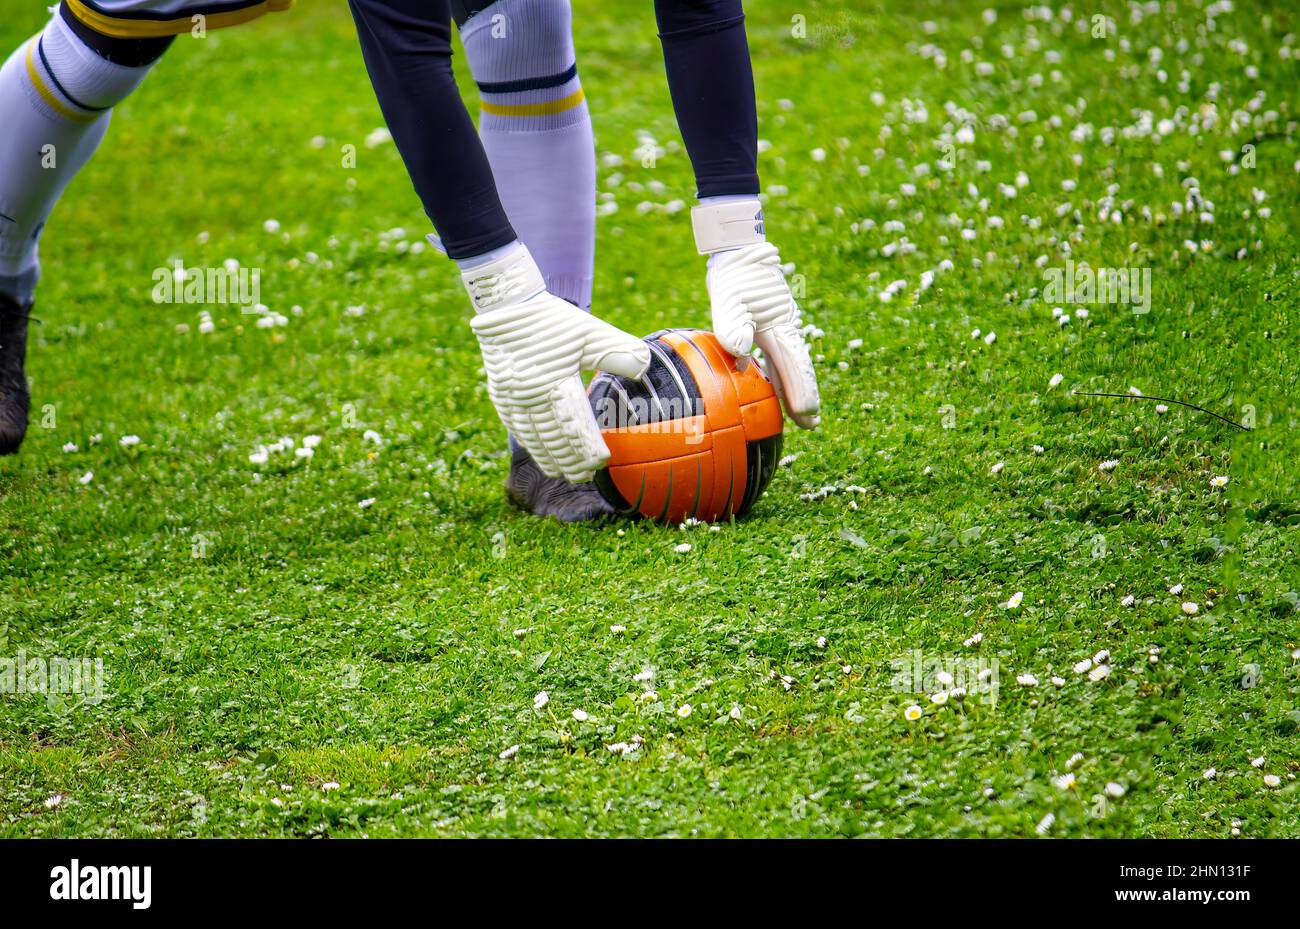 Professional football or soccer goalkeeper in action on stadium positioning ball Stock Photo